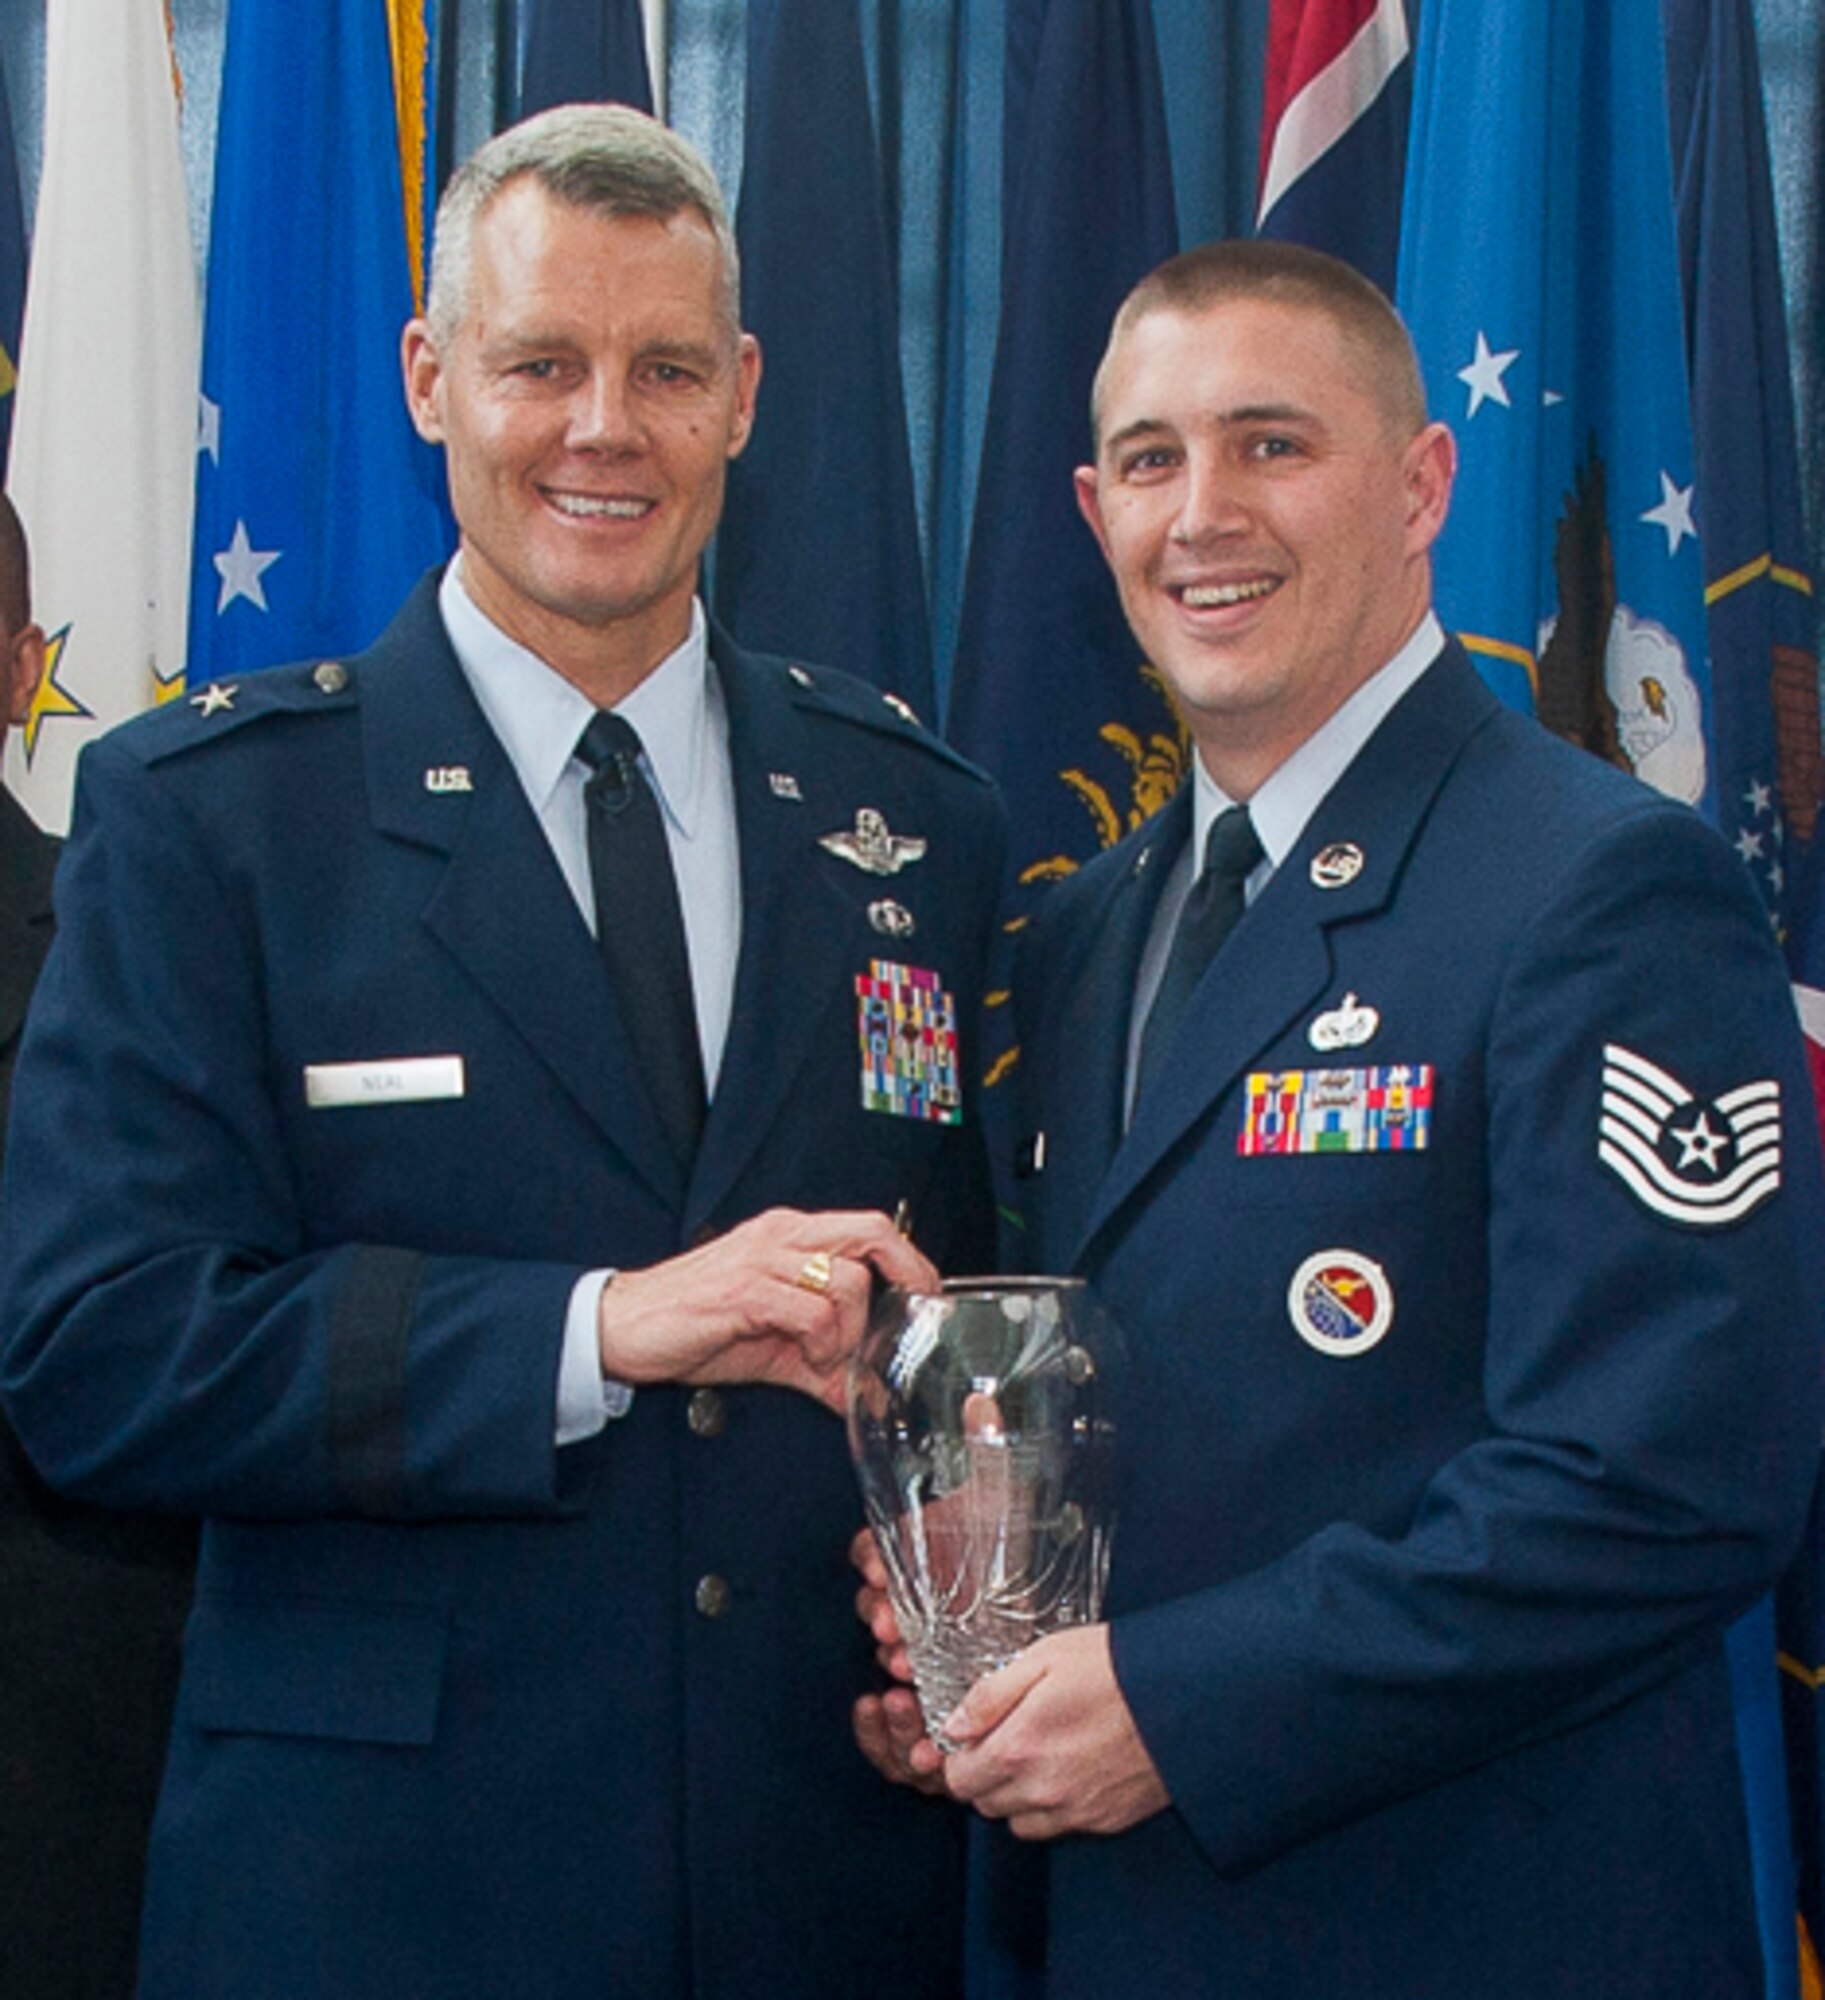 JOINT BASE ANDREWS, Md. - Tech. Sgt. Derek J. Westfall, right, an enlisted professional military education instructor at the I.G. Brown Training and Education Center, McGhee Tyson Air National Guard Base, Tenn., receives the 2011 Air National Guard Readiness Center NCO of the Year award from Brig. Gen. Brian G. Neal, ANGRC commander, during a ceremony held at Joint Base Andrews, Md., March 1, 2012. (Air National Guard photo by Master Sgt. Marvin Preston/Released)